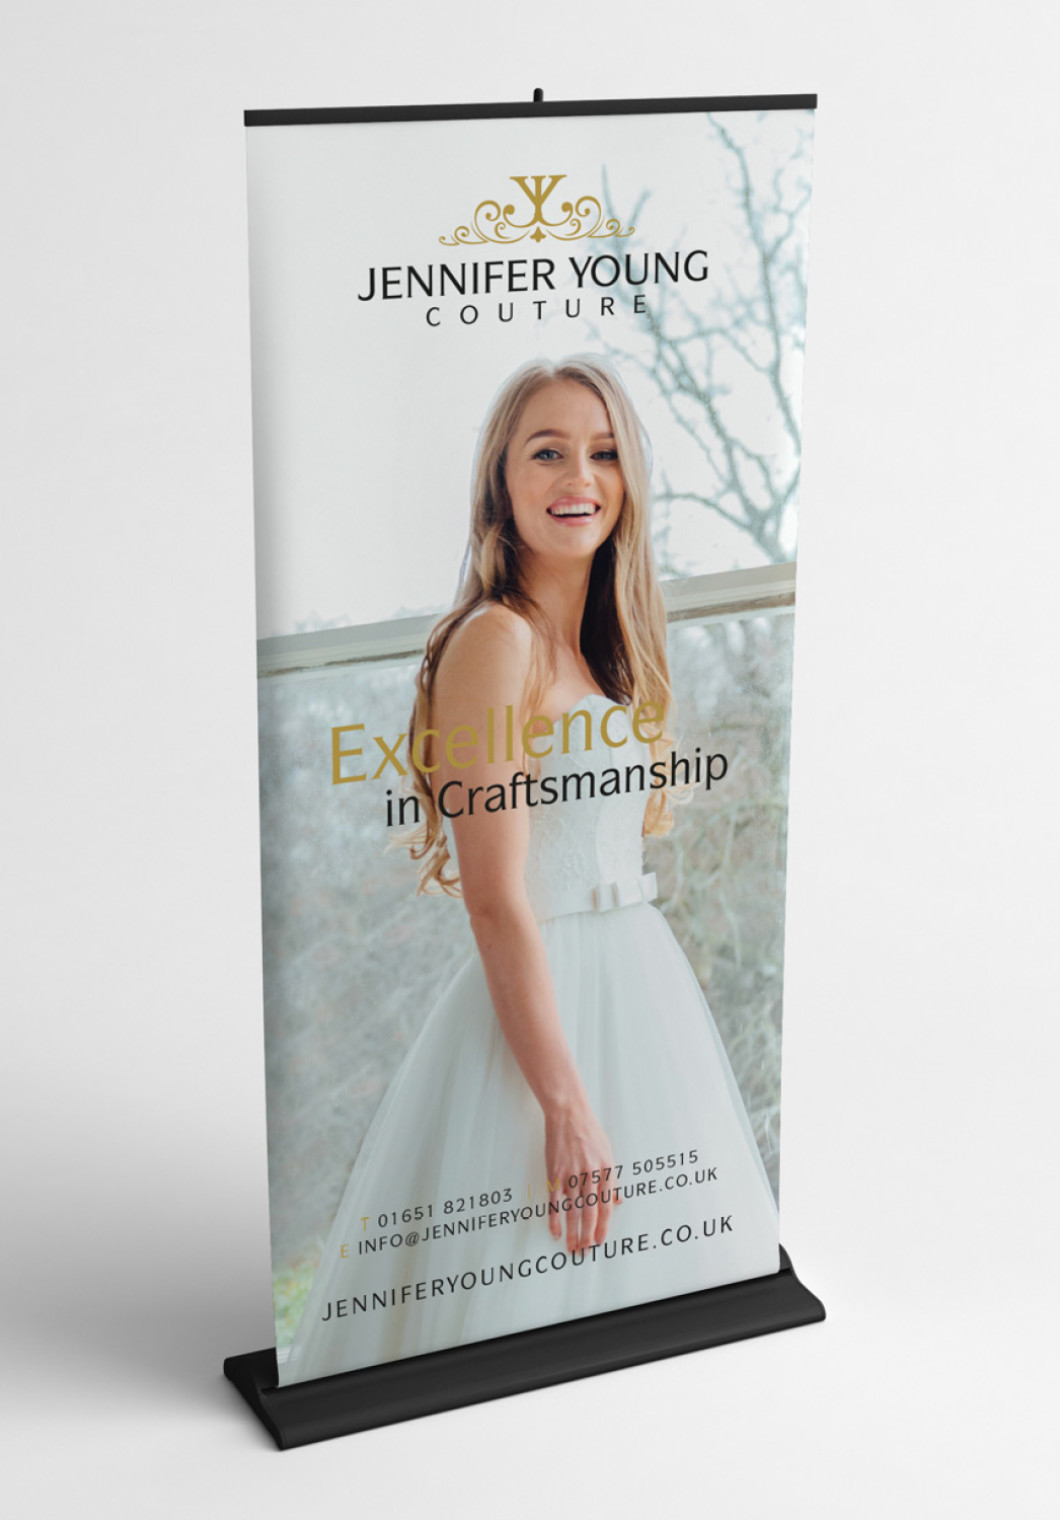 Jennifer Young Couture